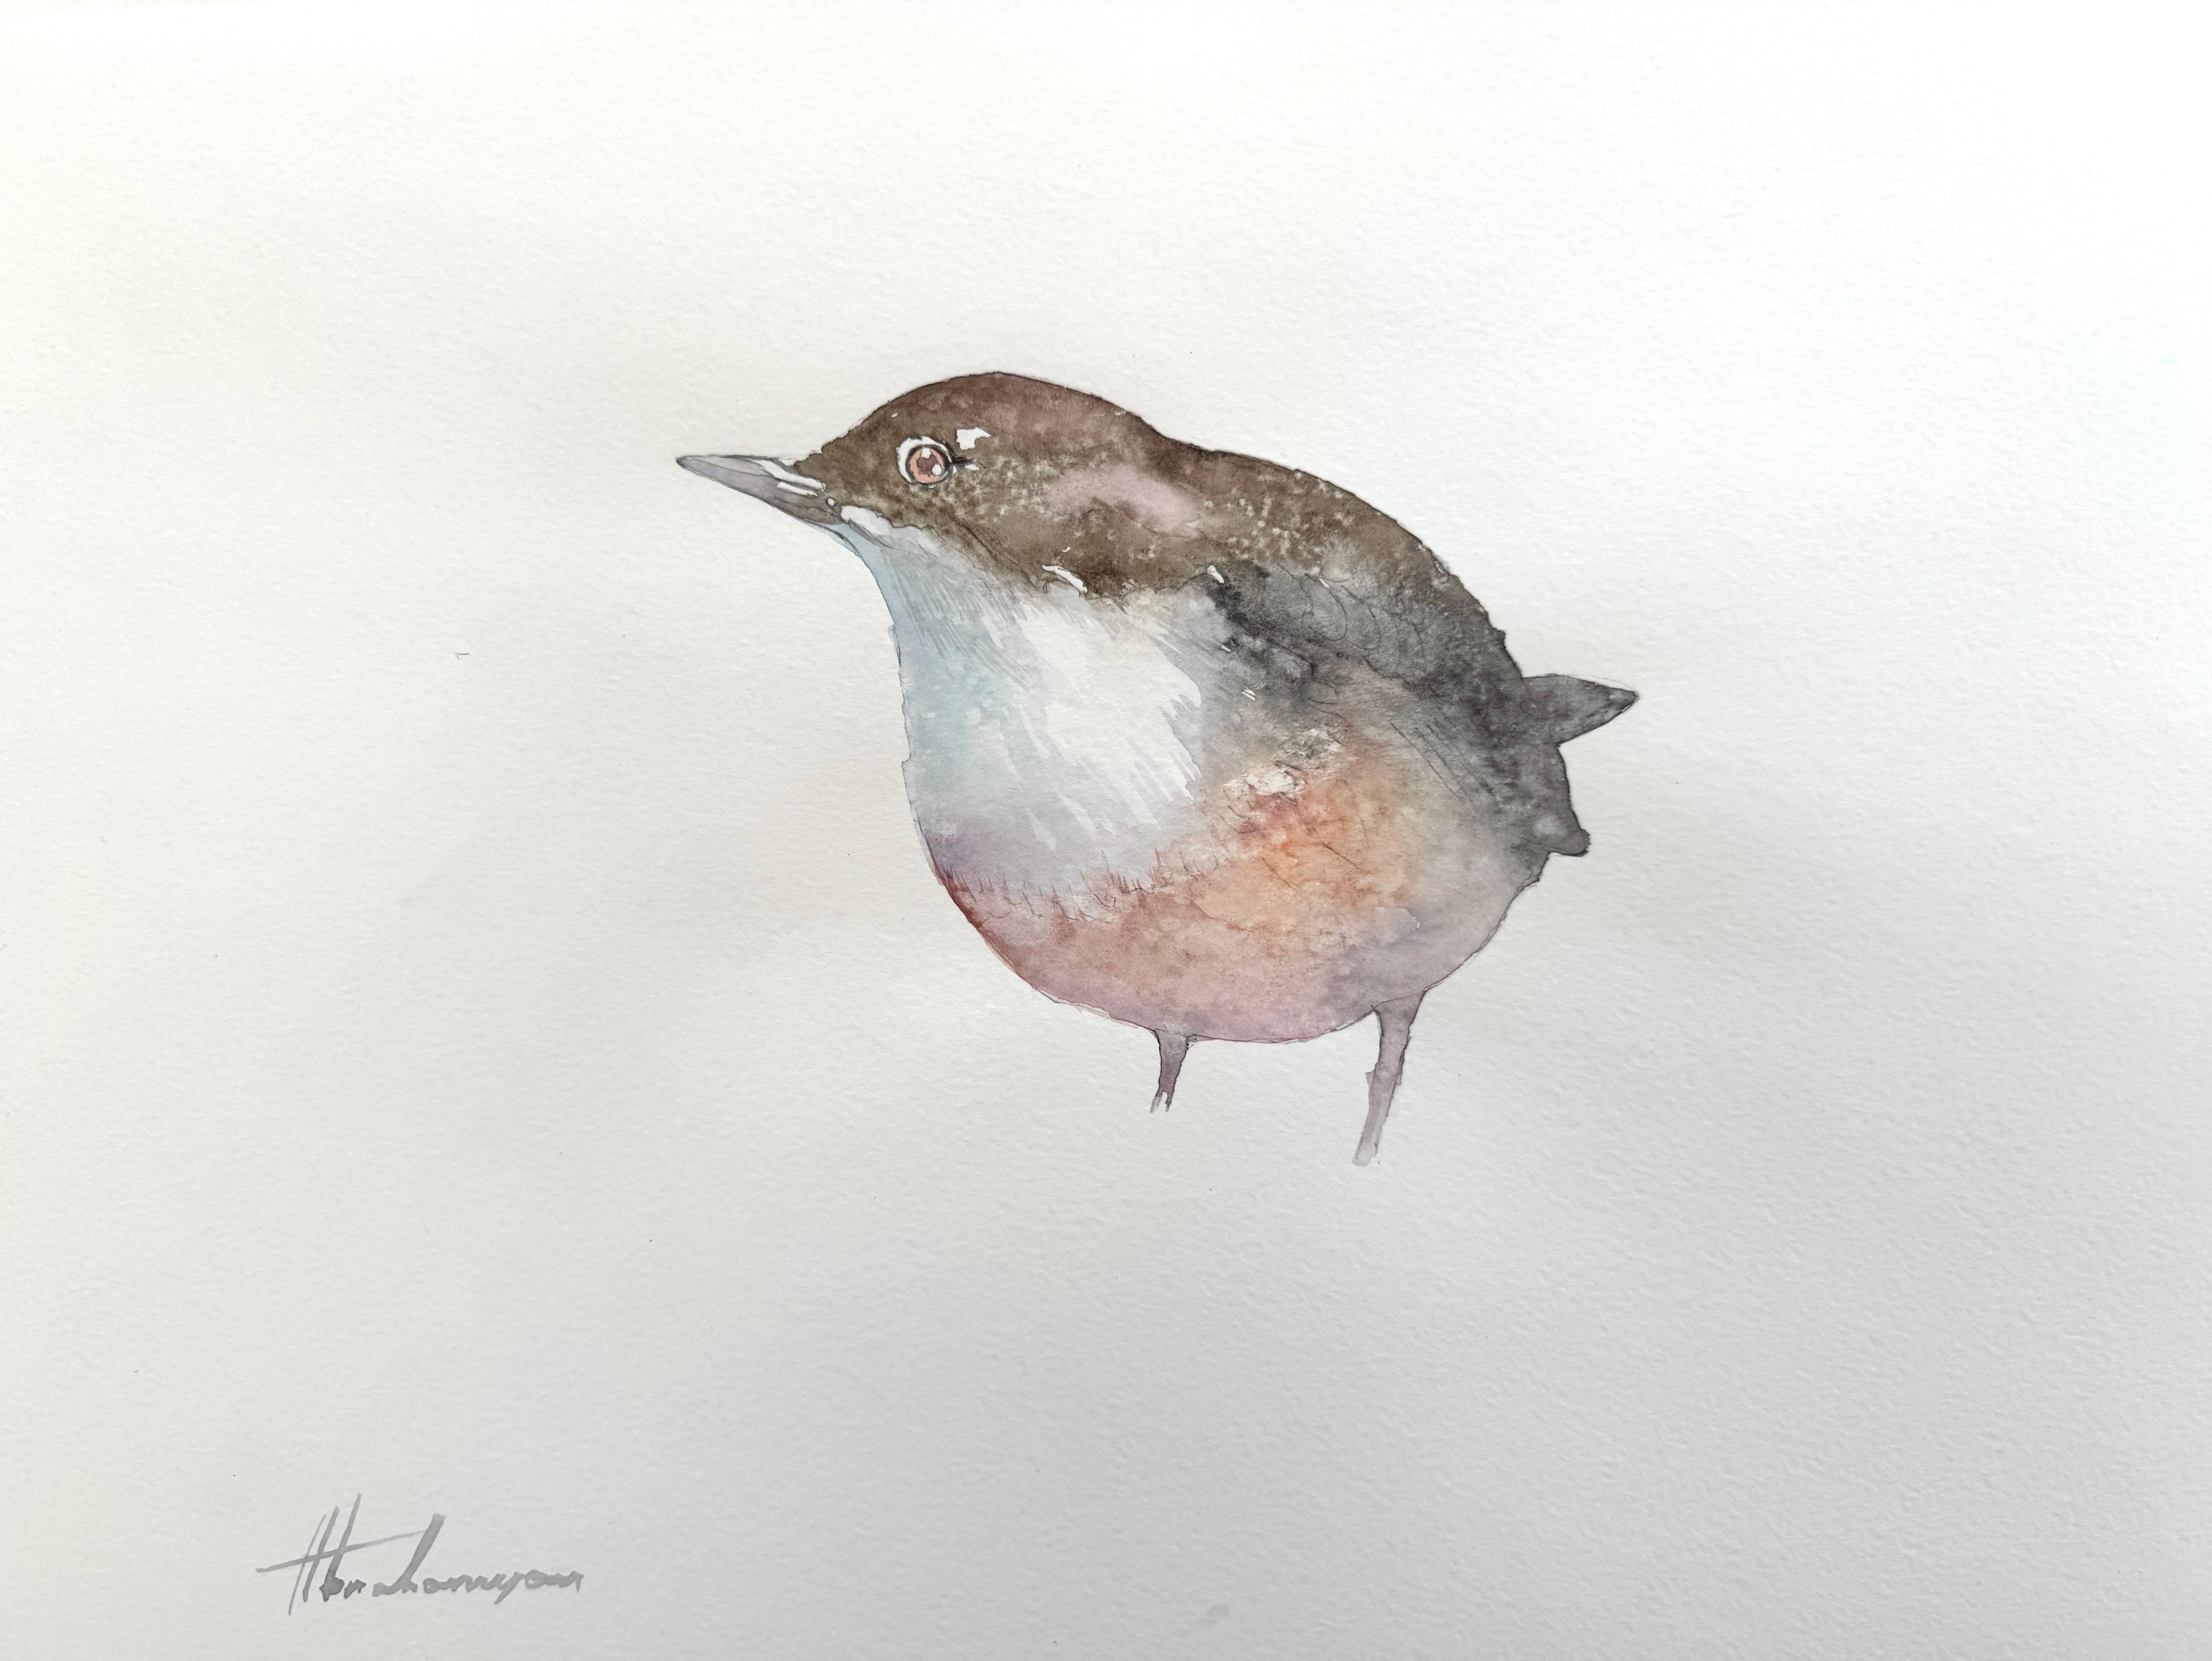 Artyom Abrahamyan Animal Art - Dripper, Bird, Watercolor on Paper, Handmade Painting, One of a Kind